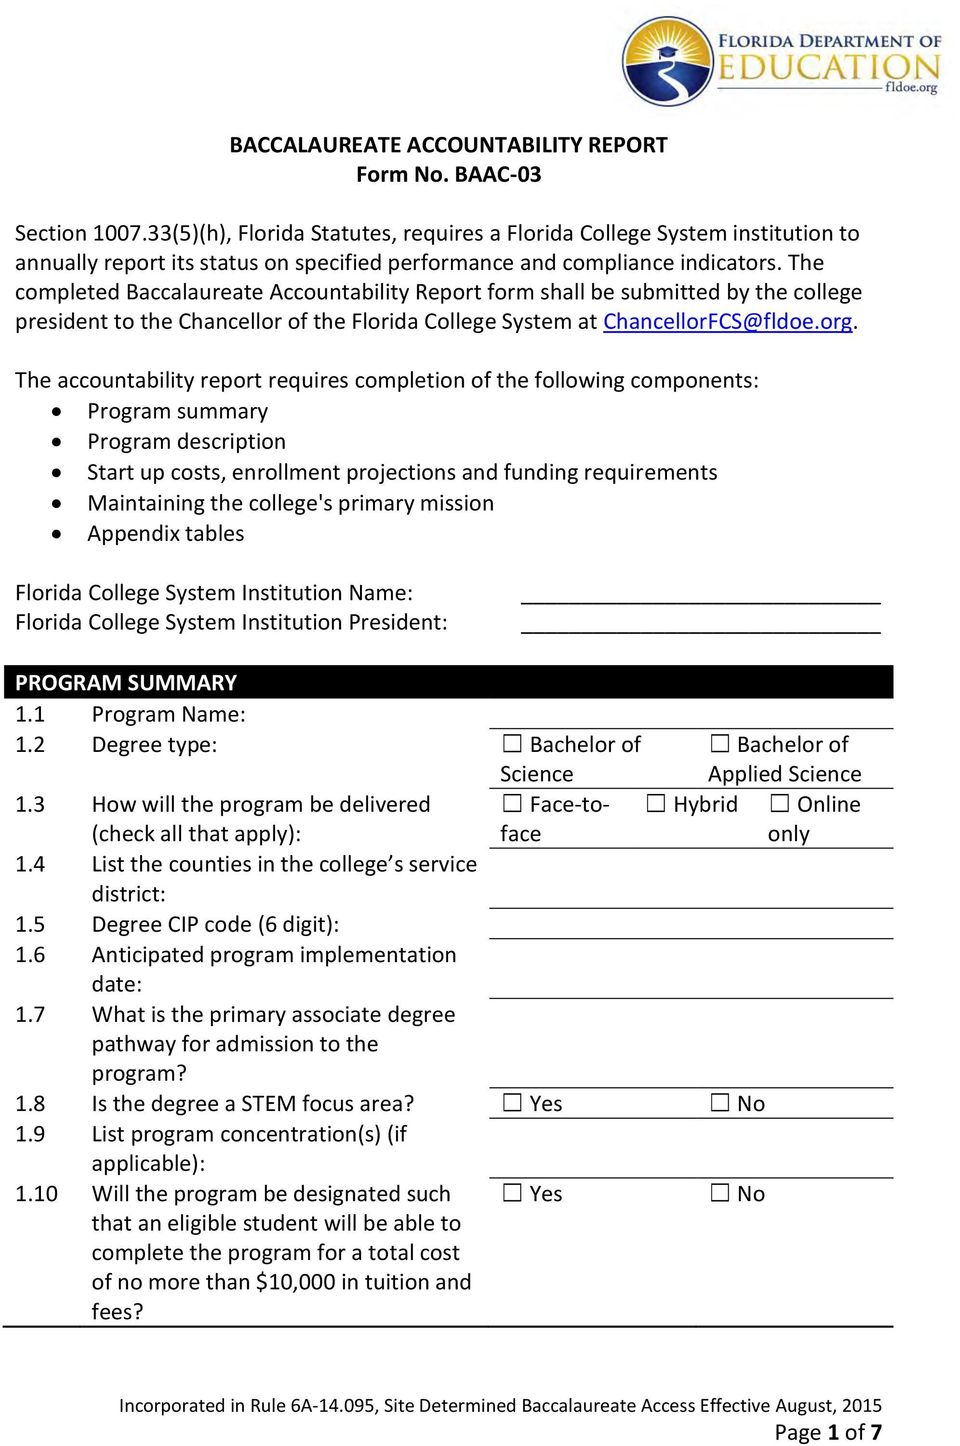 The completed Baccalaureate Accountability Report form shall be submitted by the college president to the Chancellor of the Florida College System at ChancellorFCS@fldoe.org.